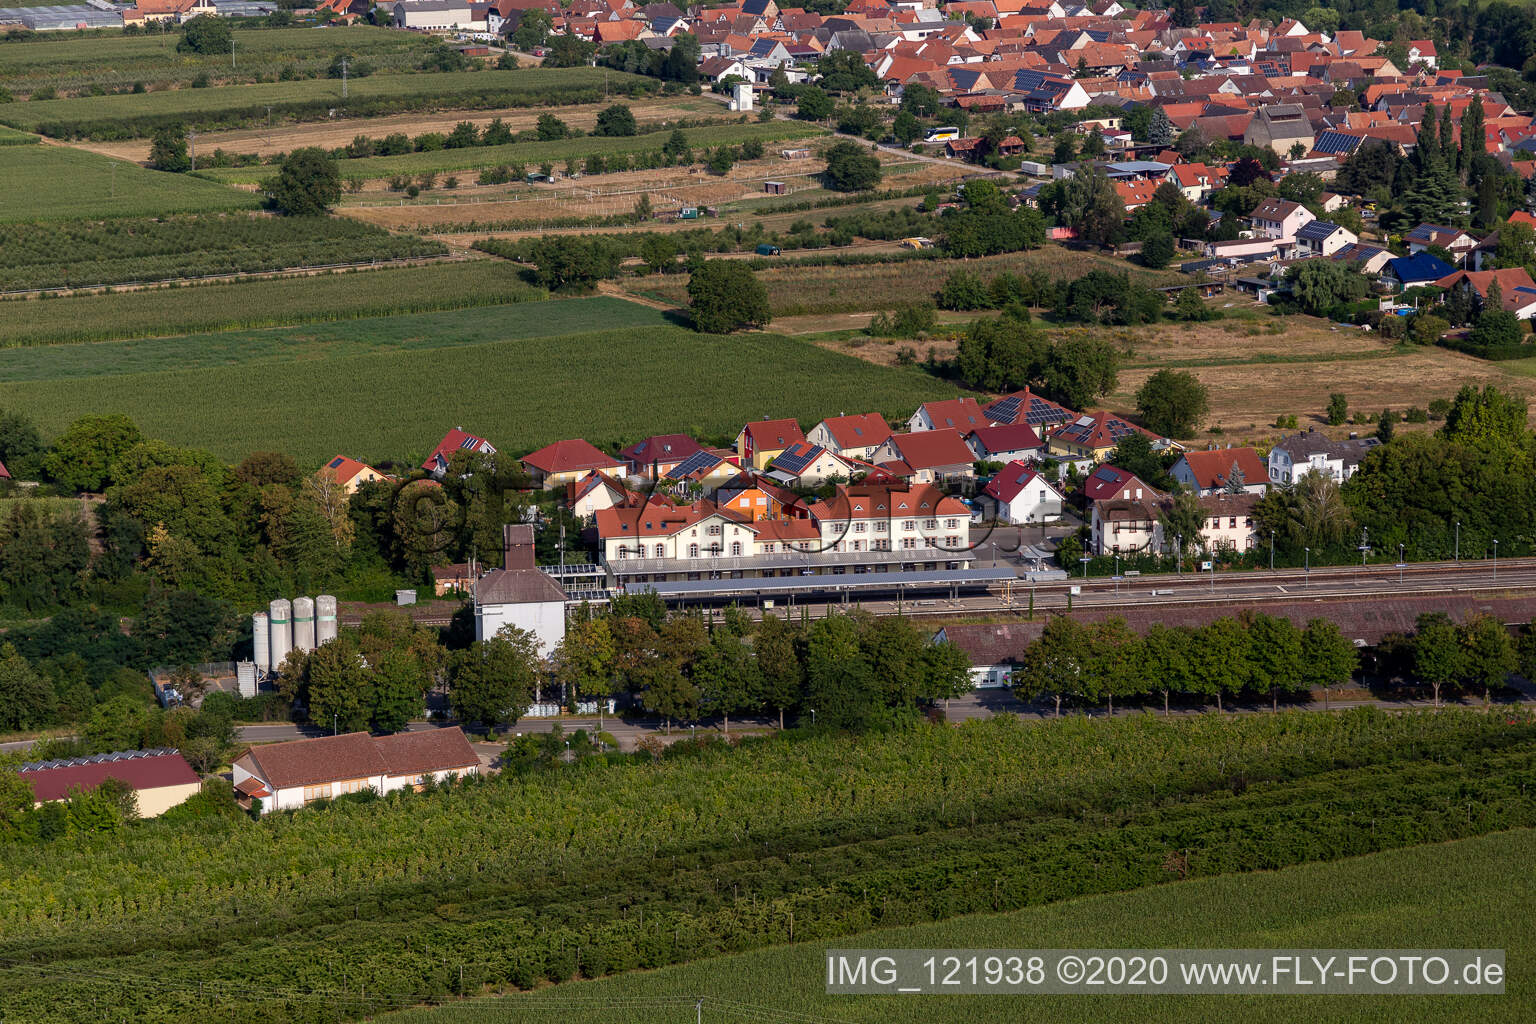 Aerial view of Railroad station in Winden in the state Rhineland-Palatinate, Germany